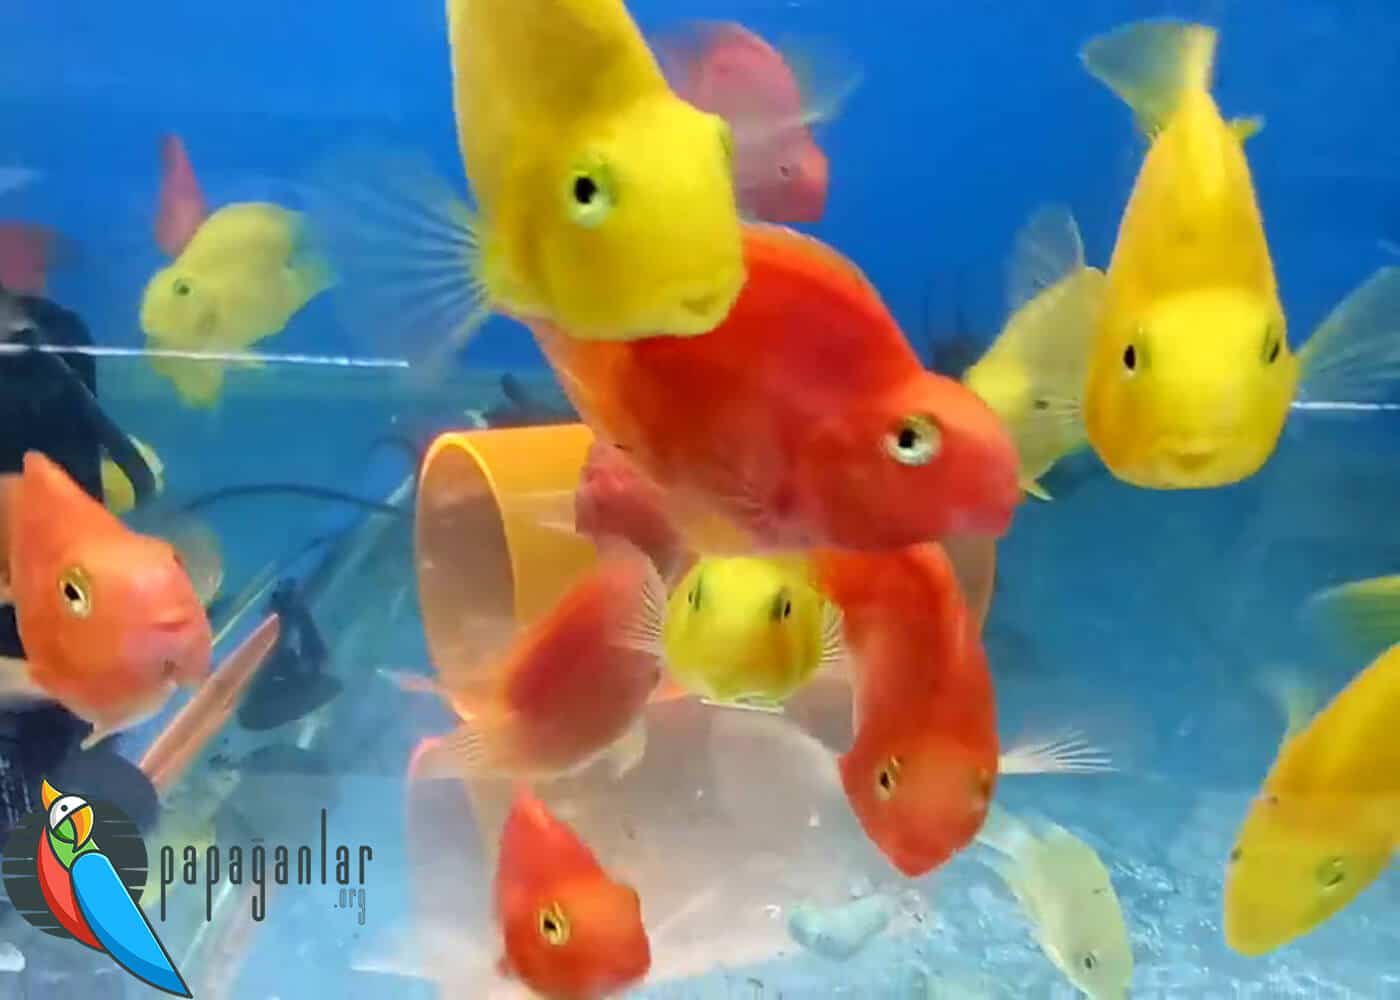 Do You Have Parrot Fish?